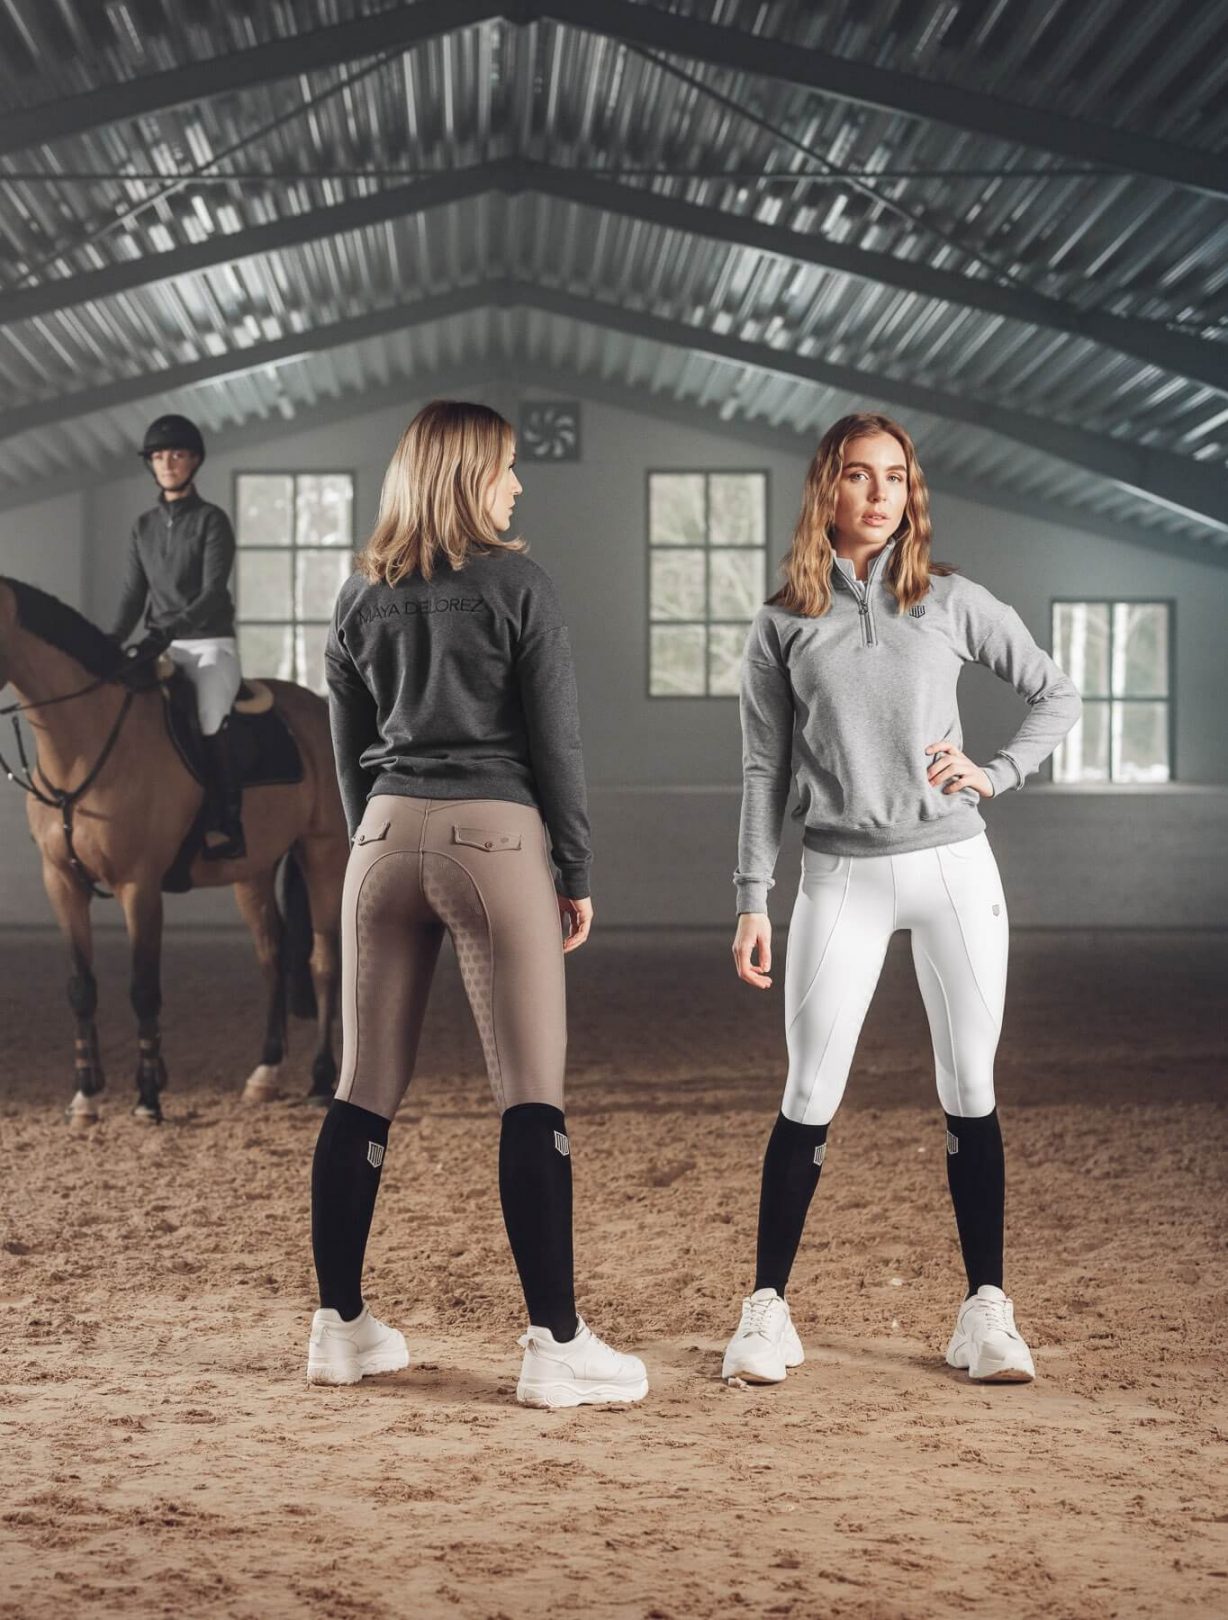 Details 78+ horse riding trousers - in.cdgdbentre